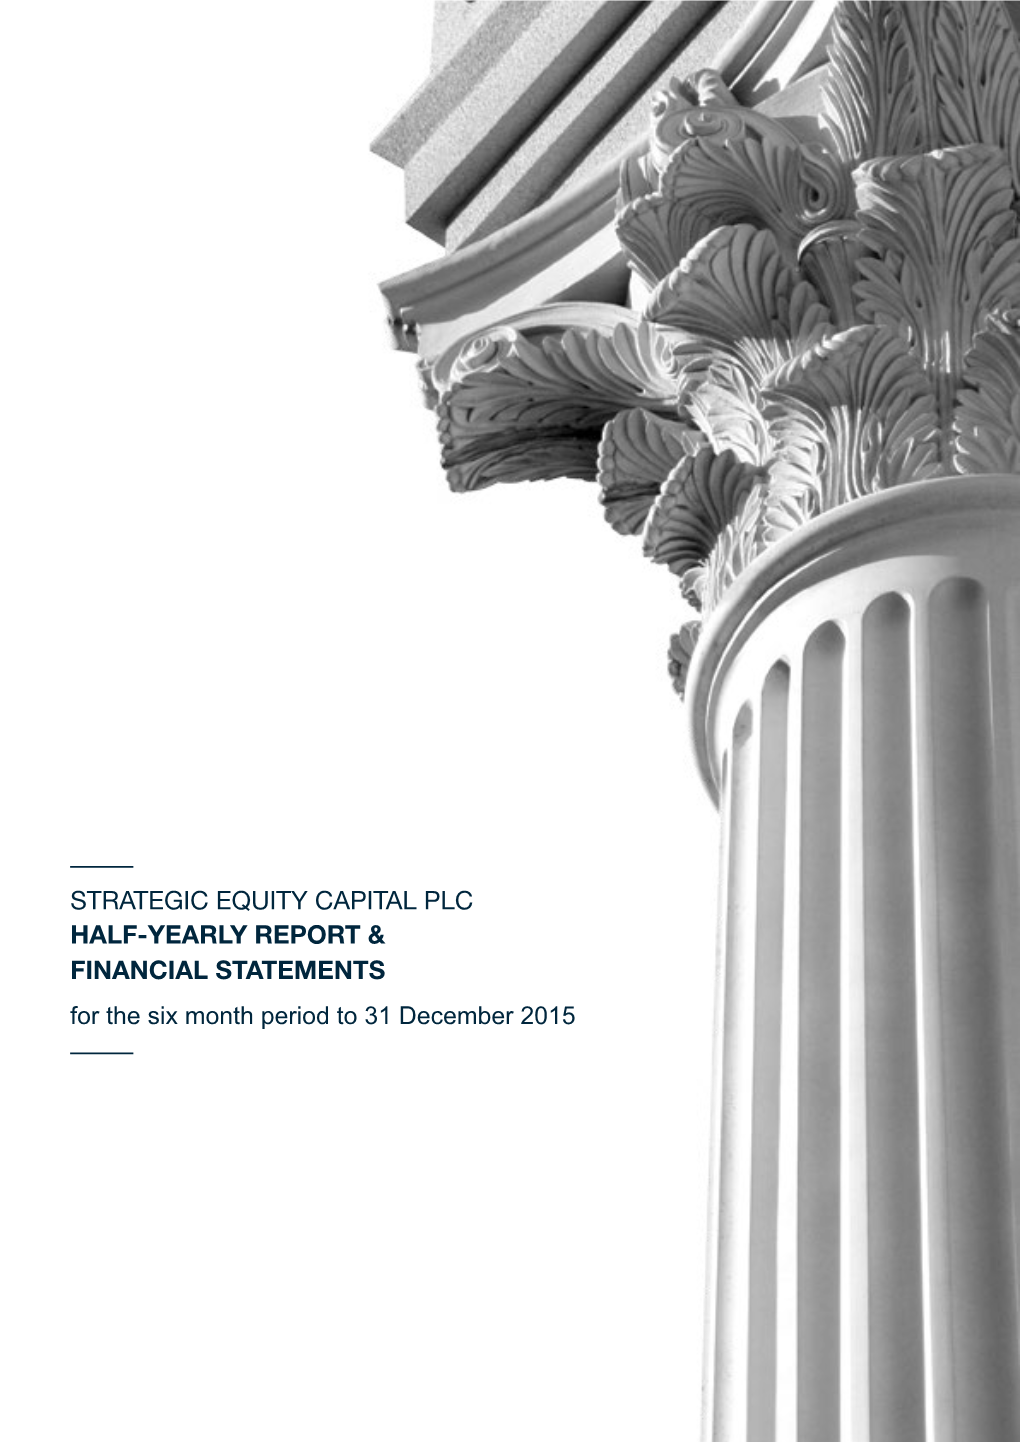 STRATEGIC EQUITY CAPITAL PLC HALF-YEARLY REPORT & FINANCIAL STATEMENTS for the Six Month Period to 31 December 2015